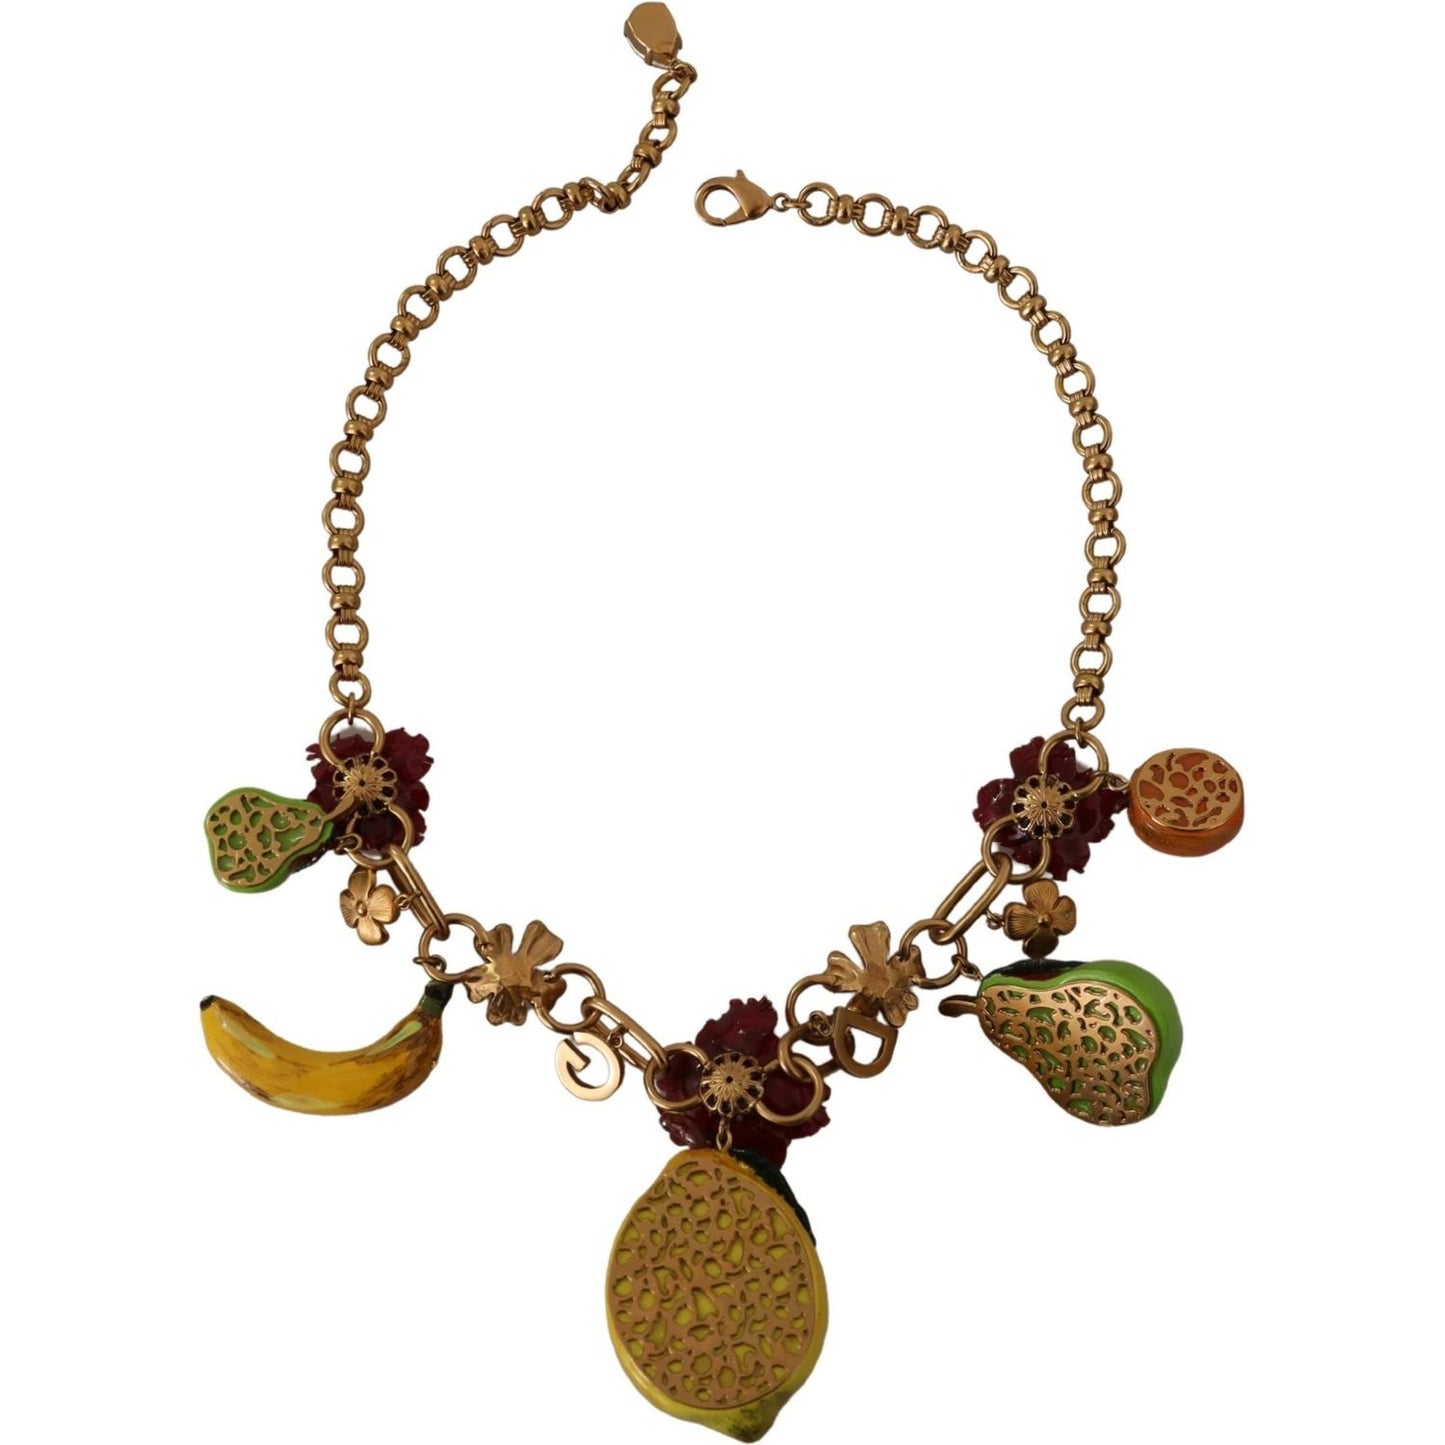 Dolce & Gabbana Chic Gold Statement Sicily Fruit Necklace WOMAN NECKLACE gold-brass-sicily-fruits-roses-statement-necklace IMG_1914-scaled-f2648f9e-846.jpg